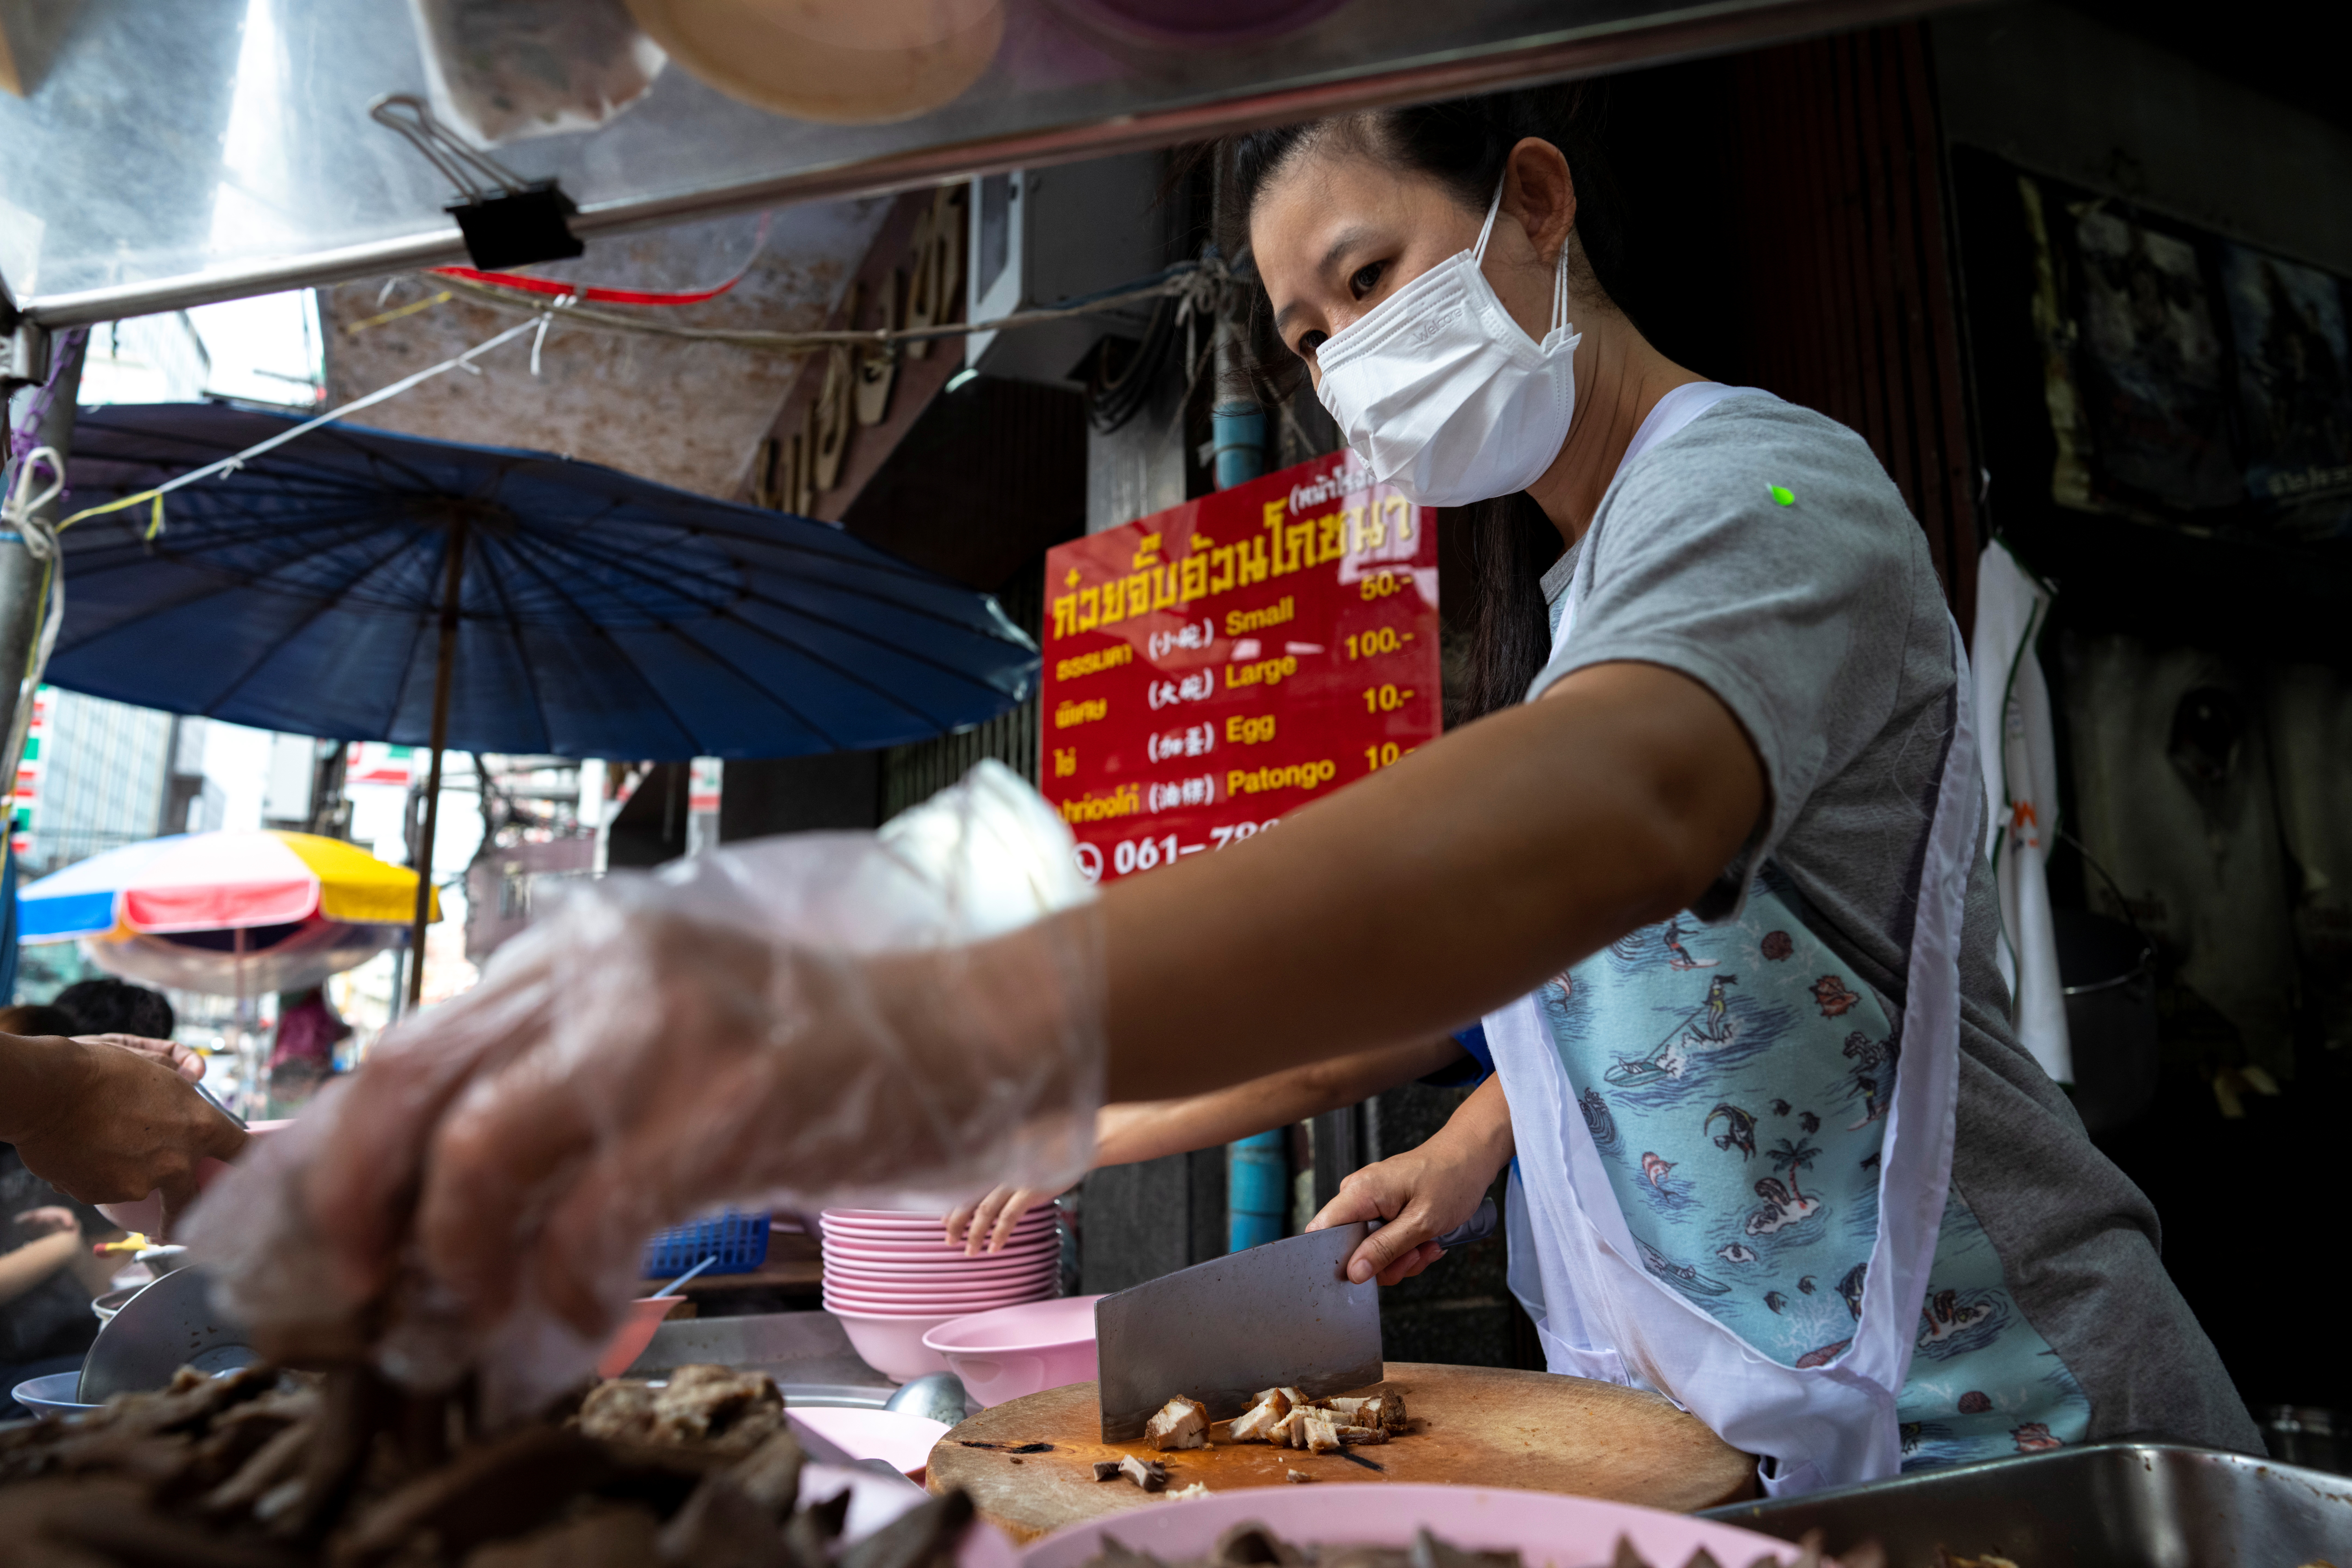 Jirintat Tangsupmanee, 45, wearing a face mask and a plastic glove to prevent the spread of the coronavirus disease (COVID-19), cooks 